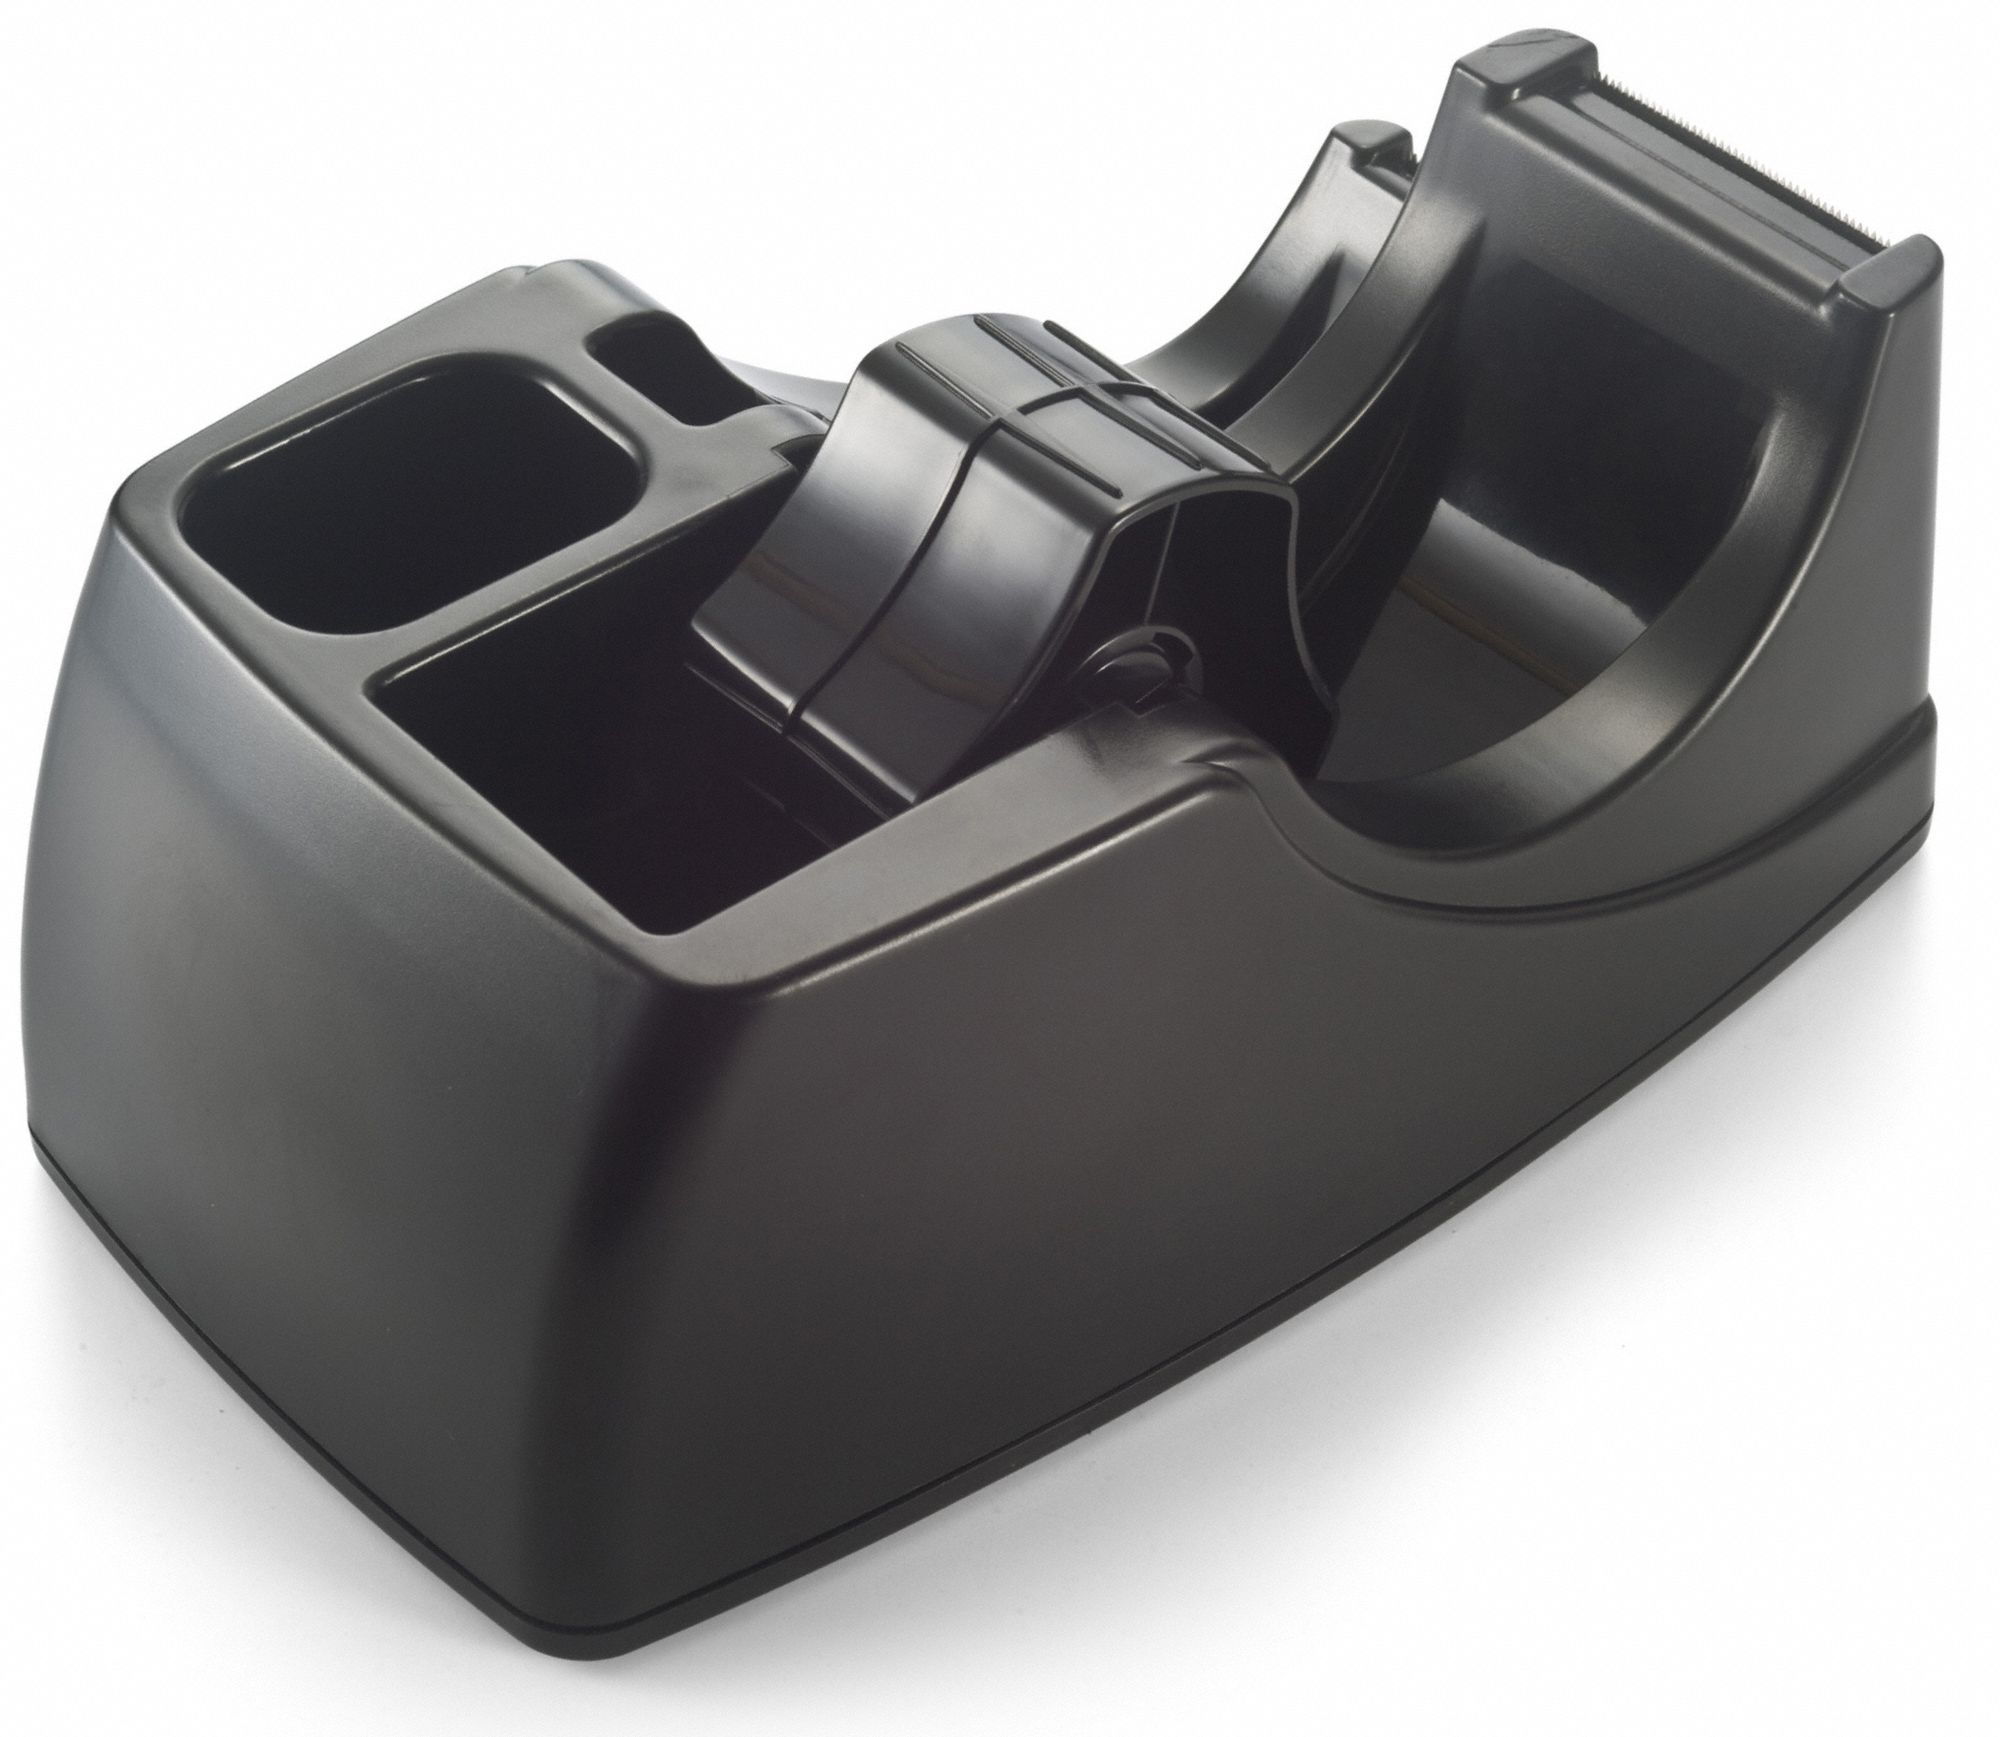 Officemate Recycled 2-in-1 Heavy Duty Tape Dispenser Black 96690 for sale online